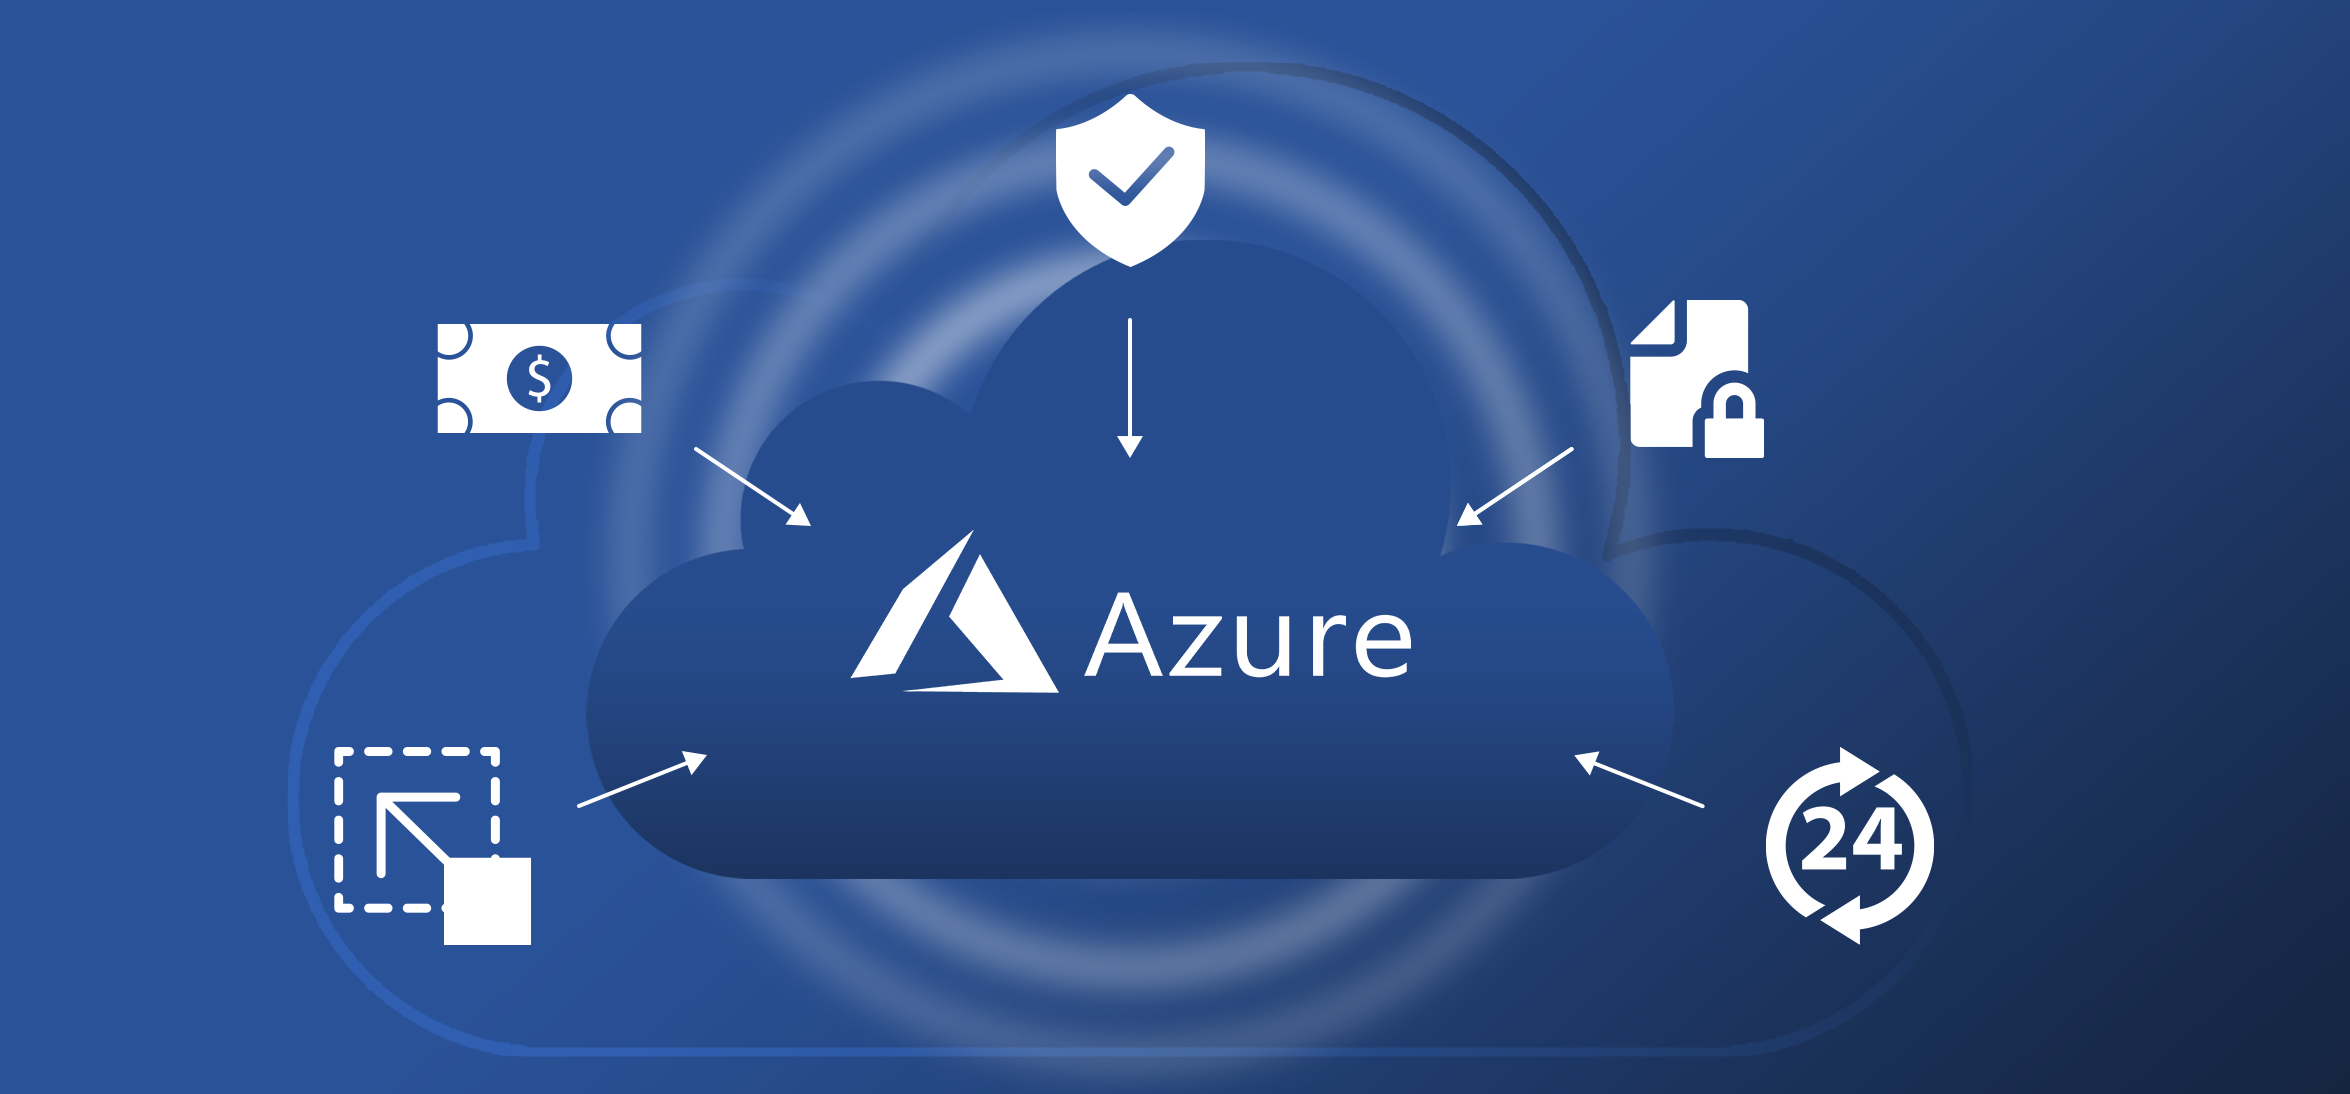 Microsoft Azure Administration and Consulting Services in Vista CA, 92081